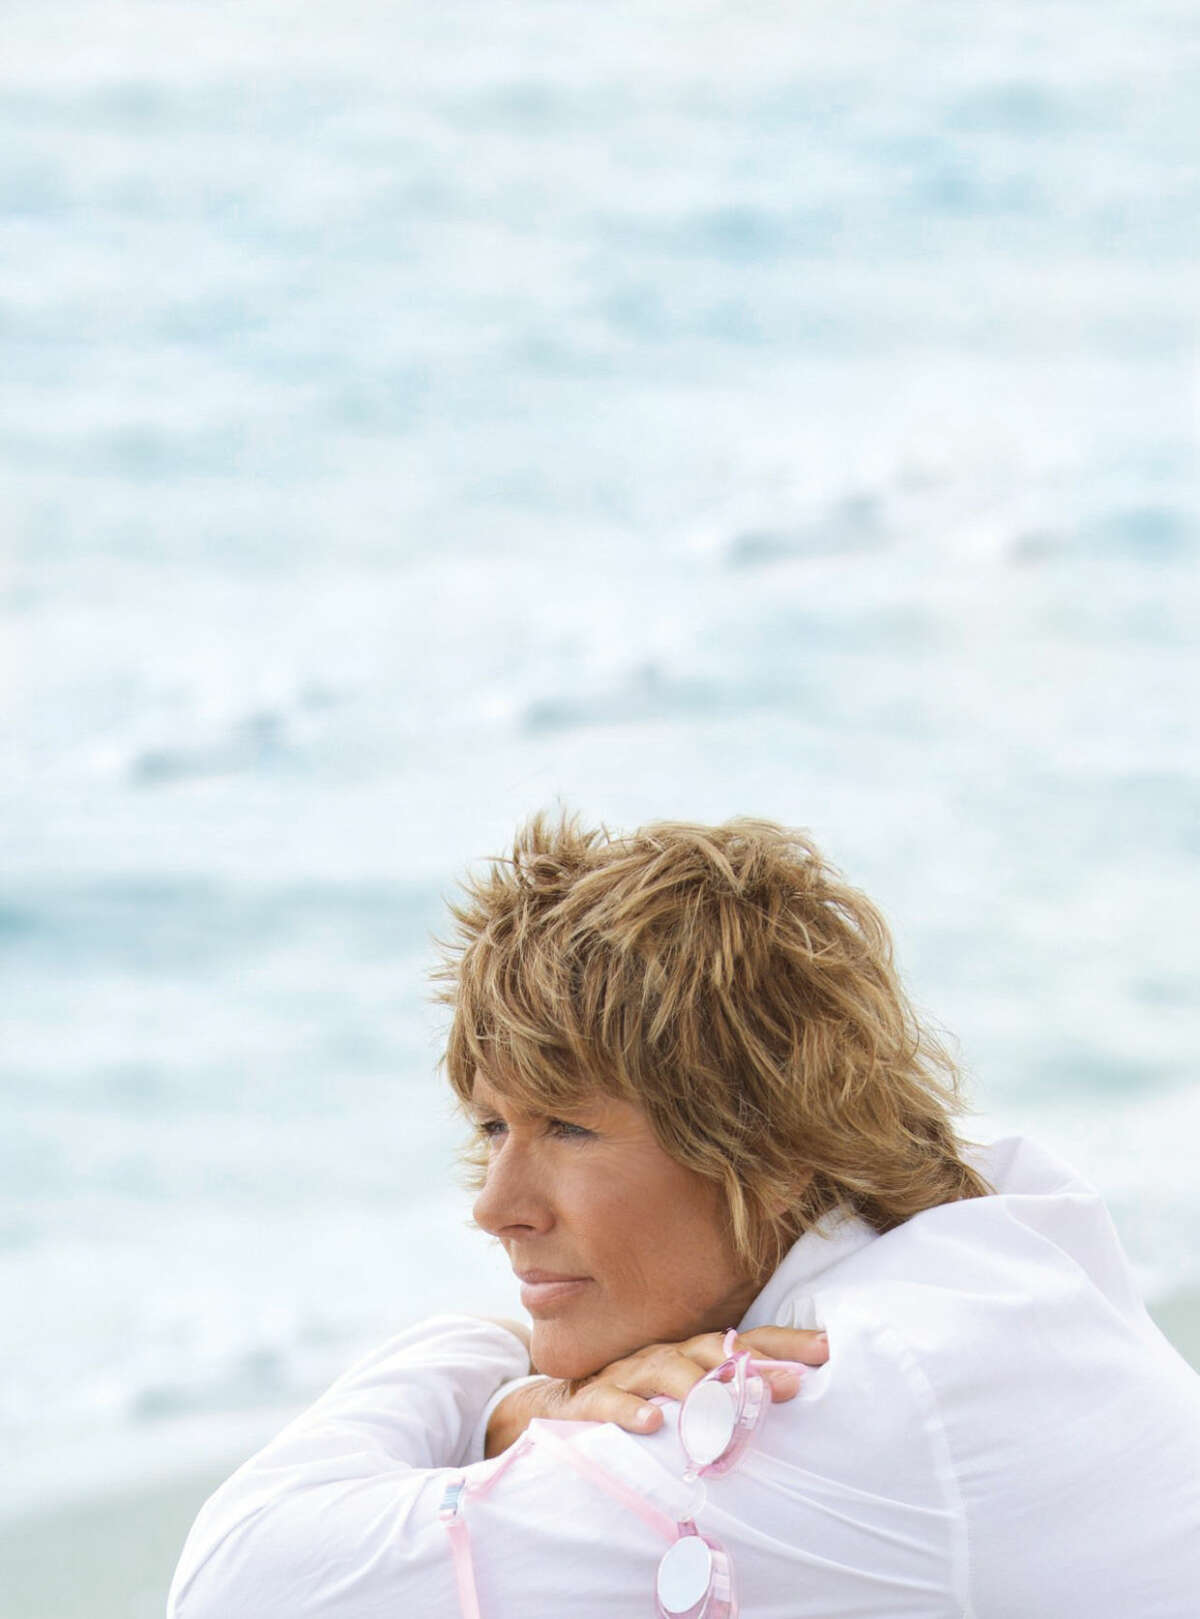 Long distance swimmer Diana Nyad visits Wilton Library on Tuesday, Oct. 20, from 7-8:30 p.m. to discuss her brand new book, Find A Way. The book is the captivating story of her life and her inspiring Cuba to U.S. swim which she accomplished in 2013 at the age of 64.